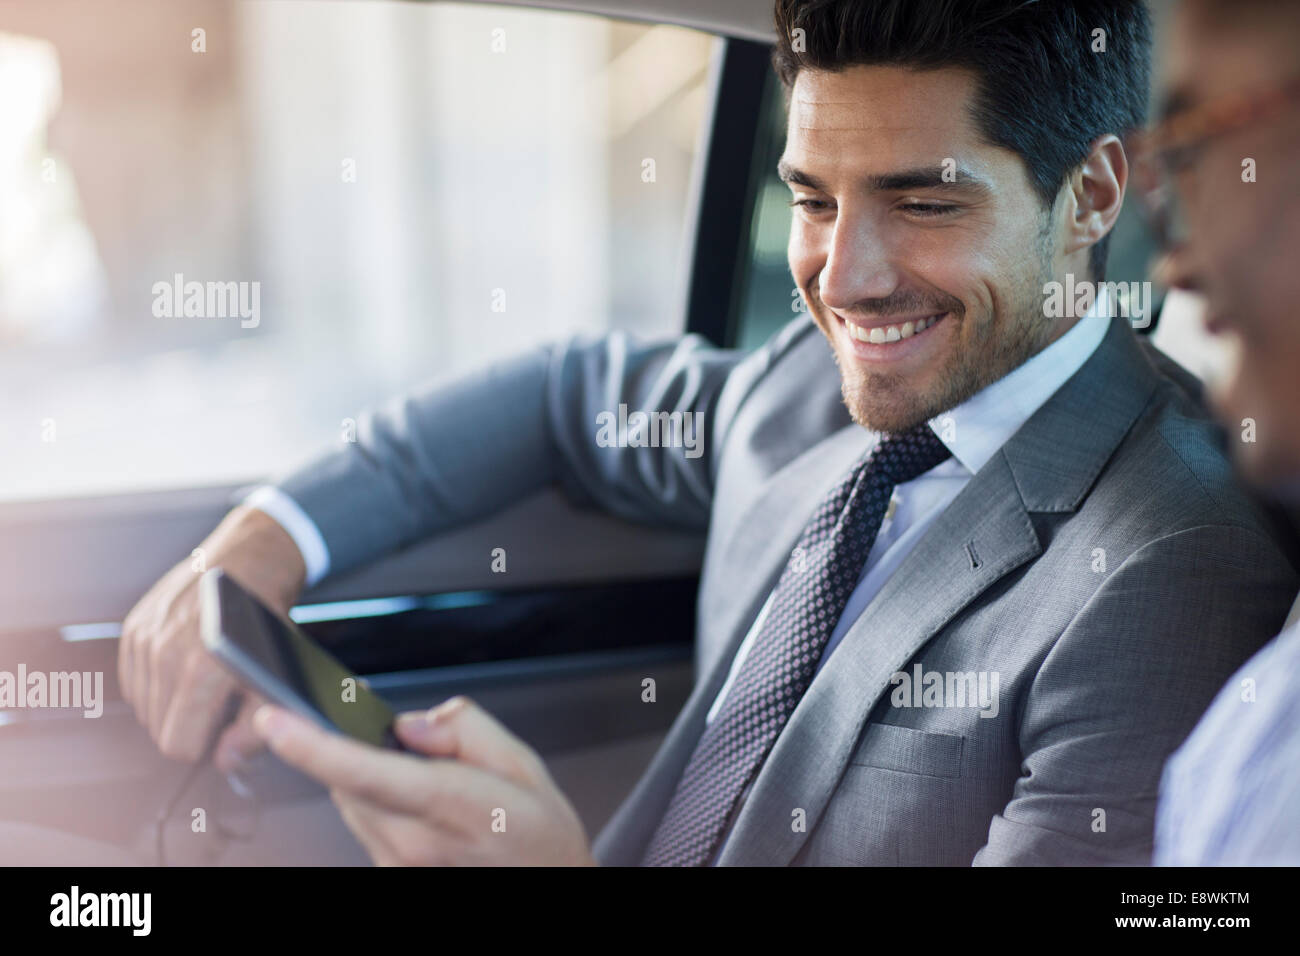 Businessmen looking at cell phone in car Stock Photo